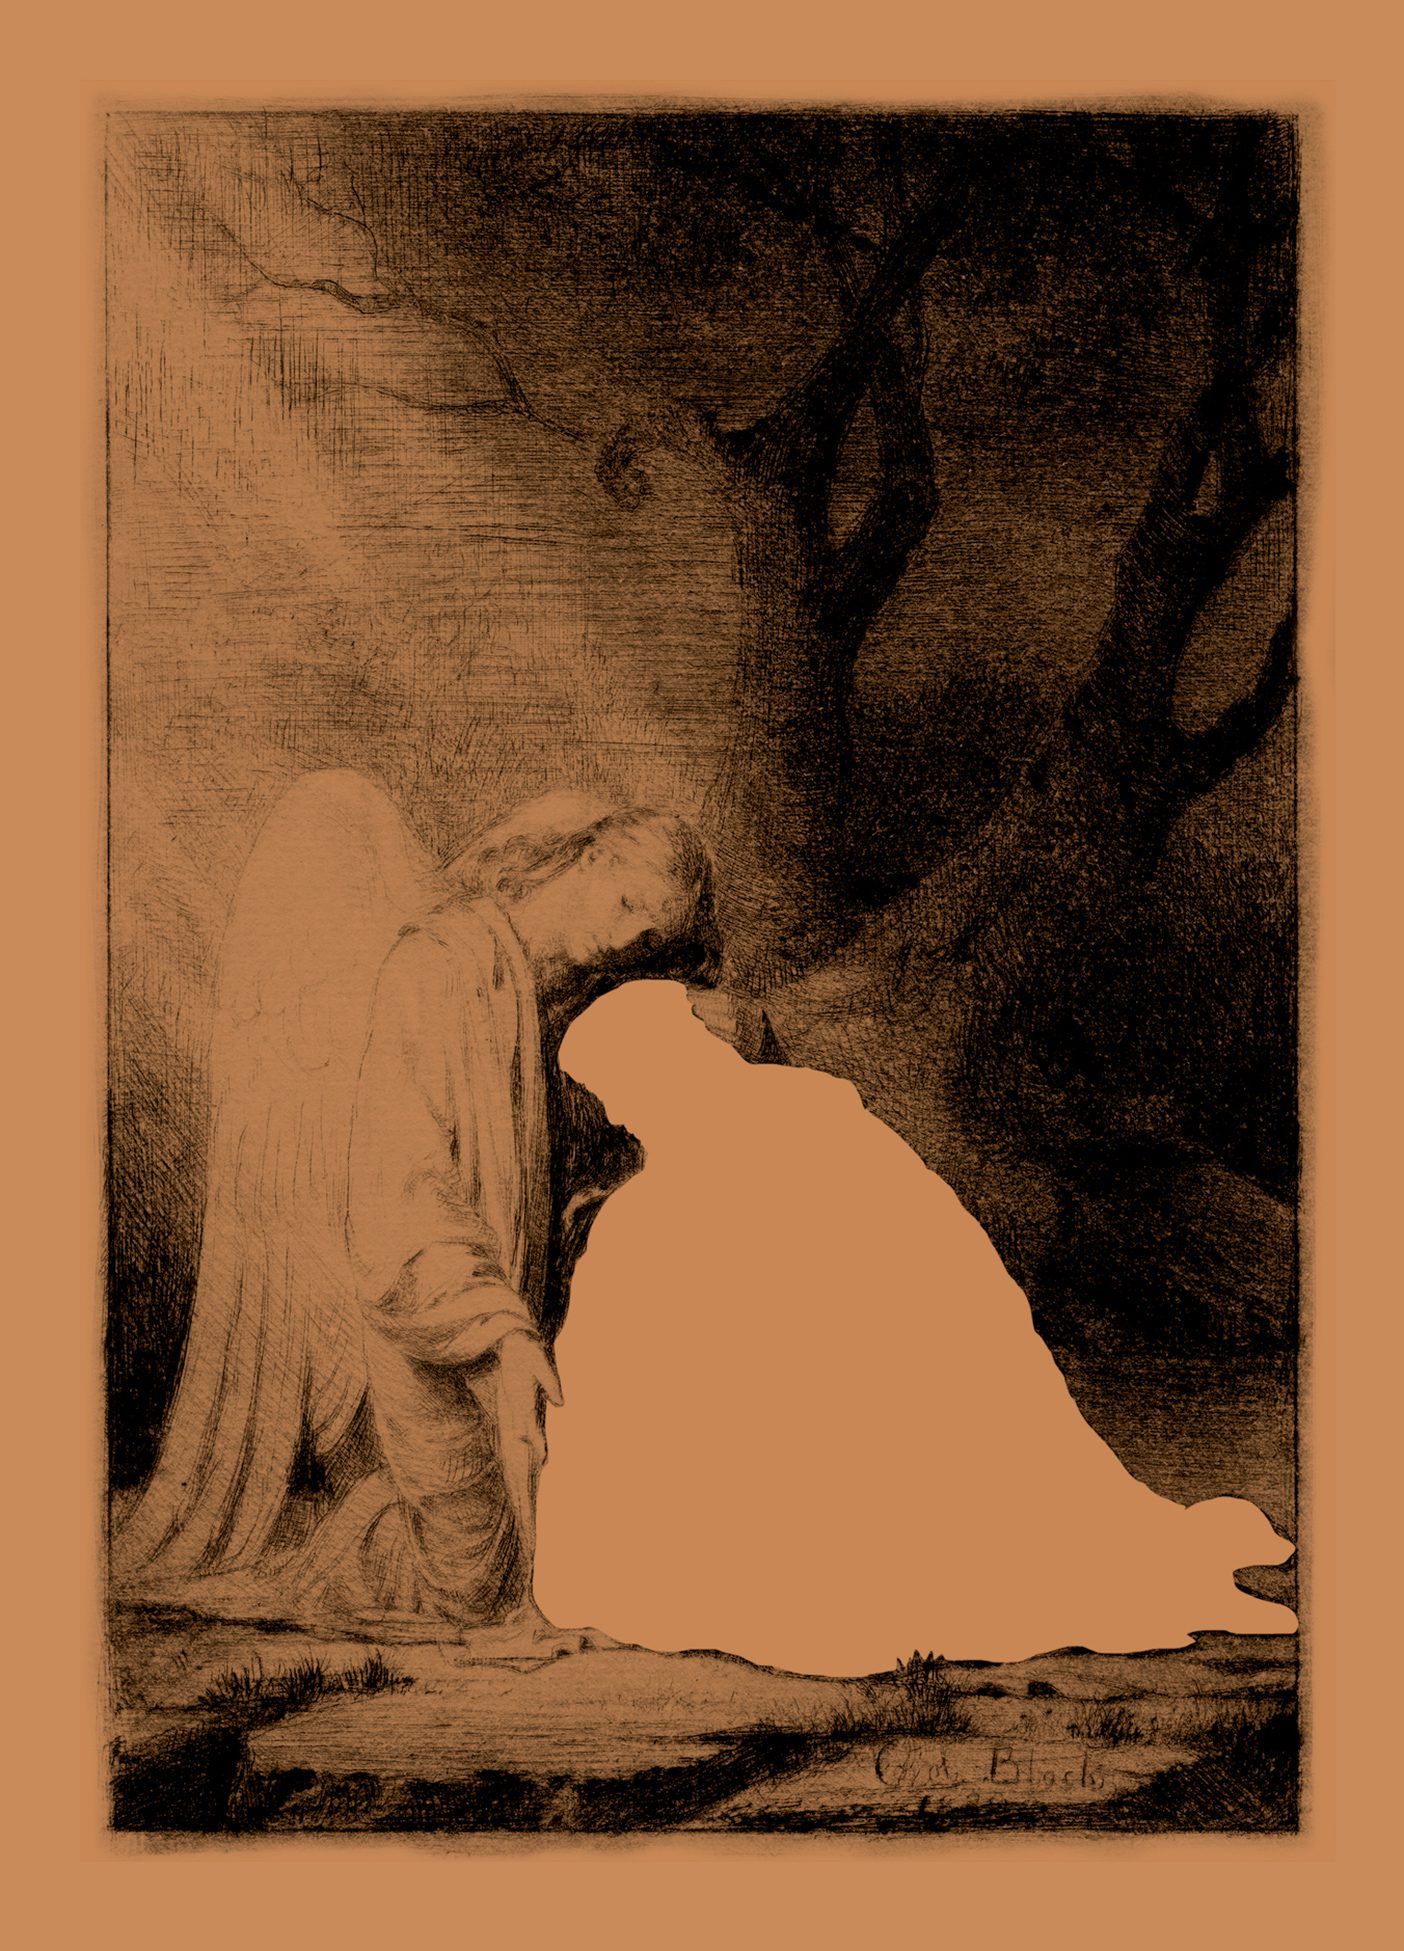 A wood etching by Carl Bloch shows Christ at Gethsemane with an angel comforting Him. The figure of Christ is cropped out, leaving a color background in His place.